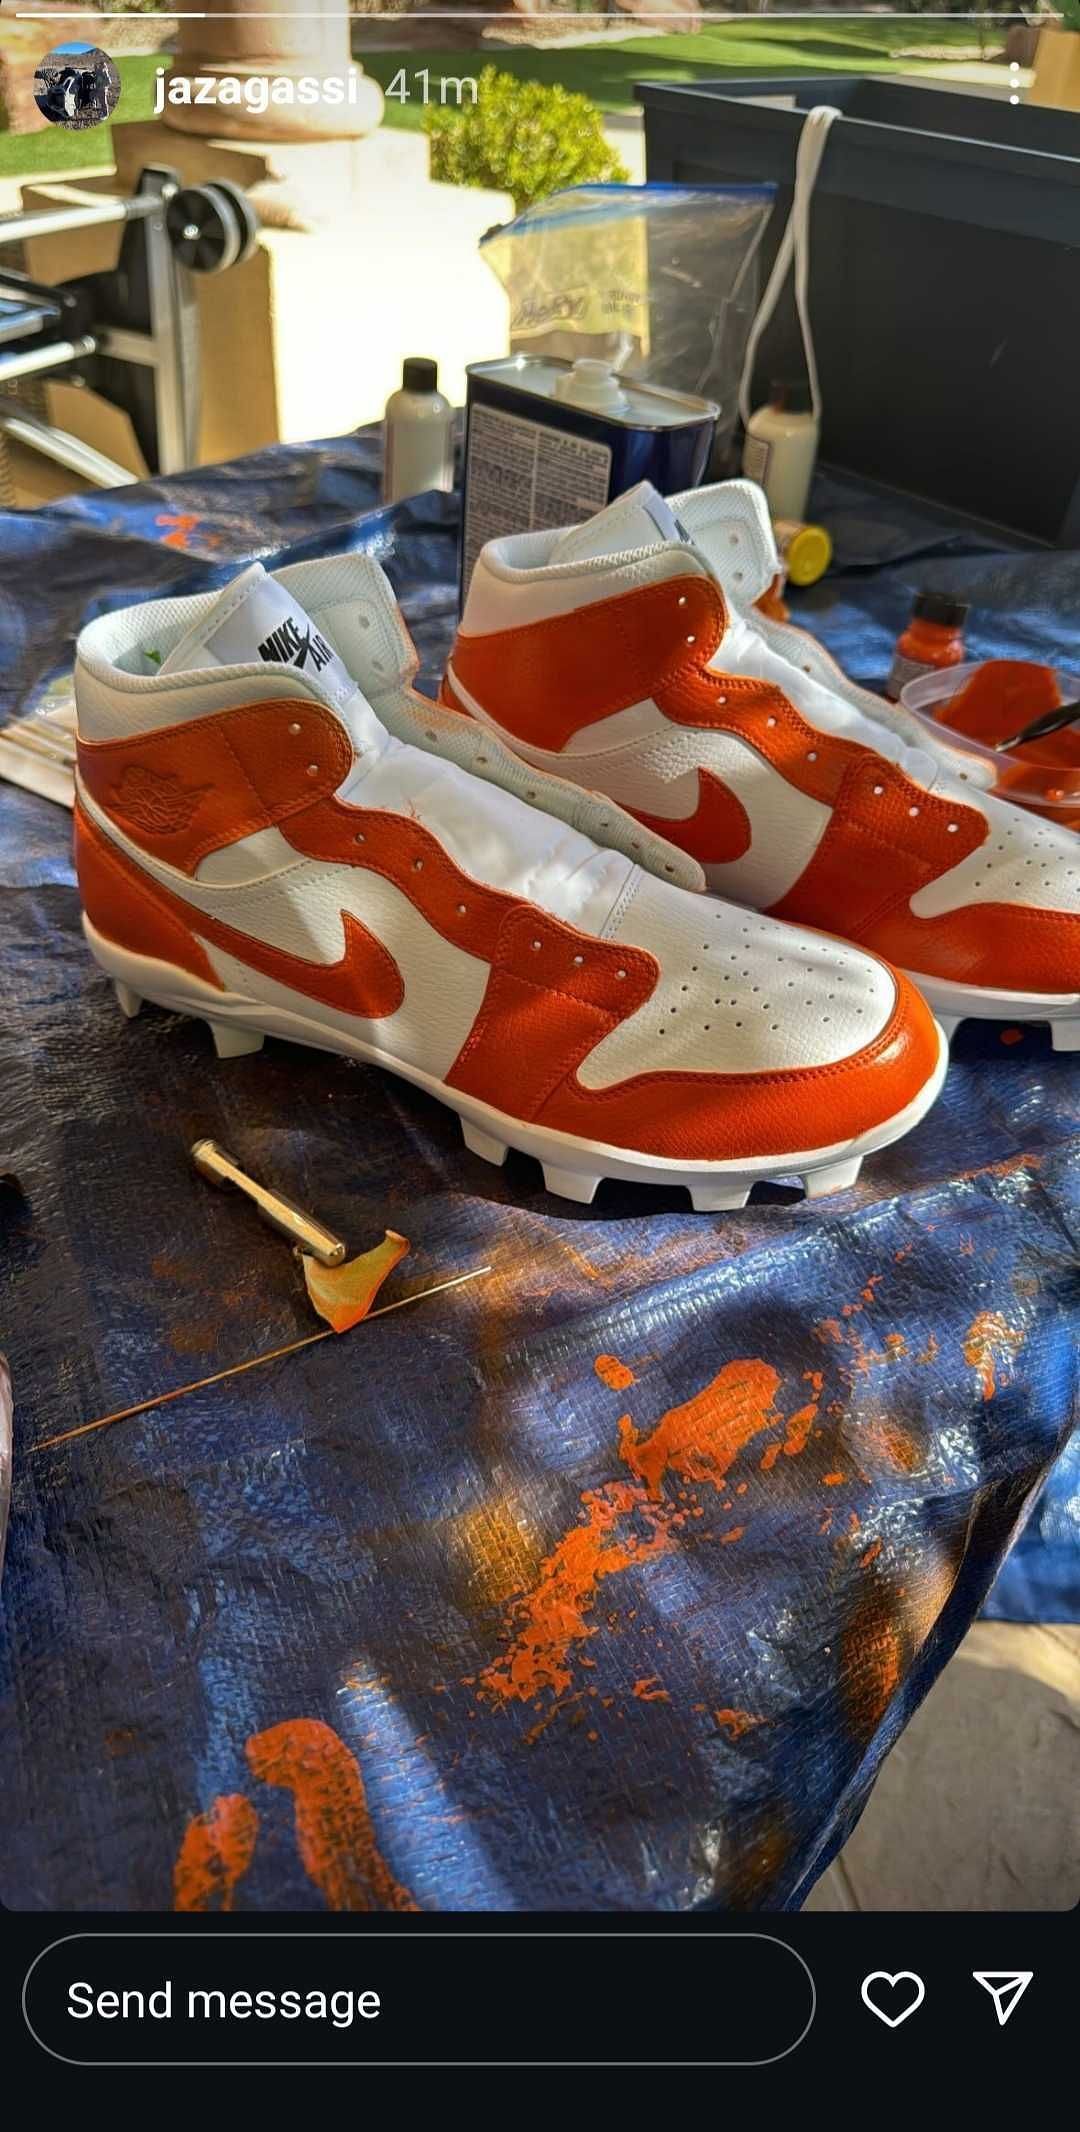 Andre Agassi&#039;s daughter Jaz Elle&#039;s Instagram post featuring a reworked pair of old white Nike Air football boots